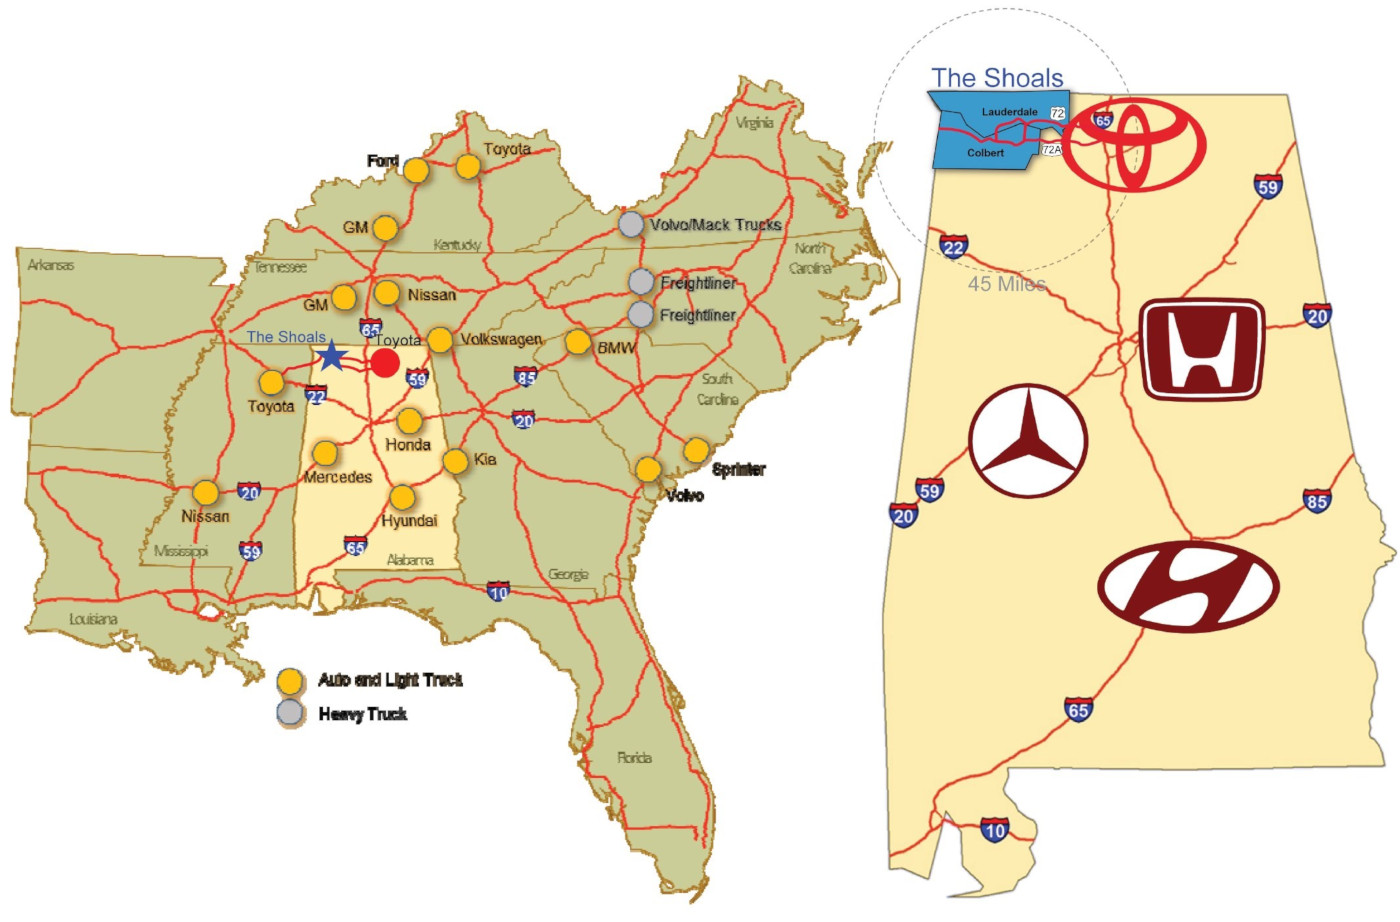 Many existing OEMs are located around the Shoals.